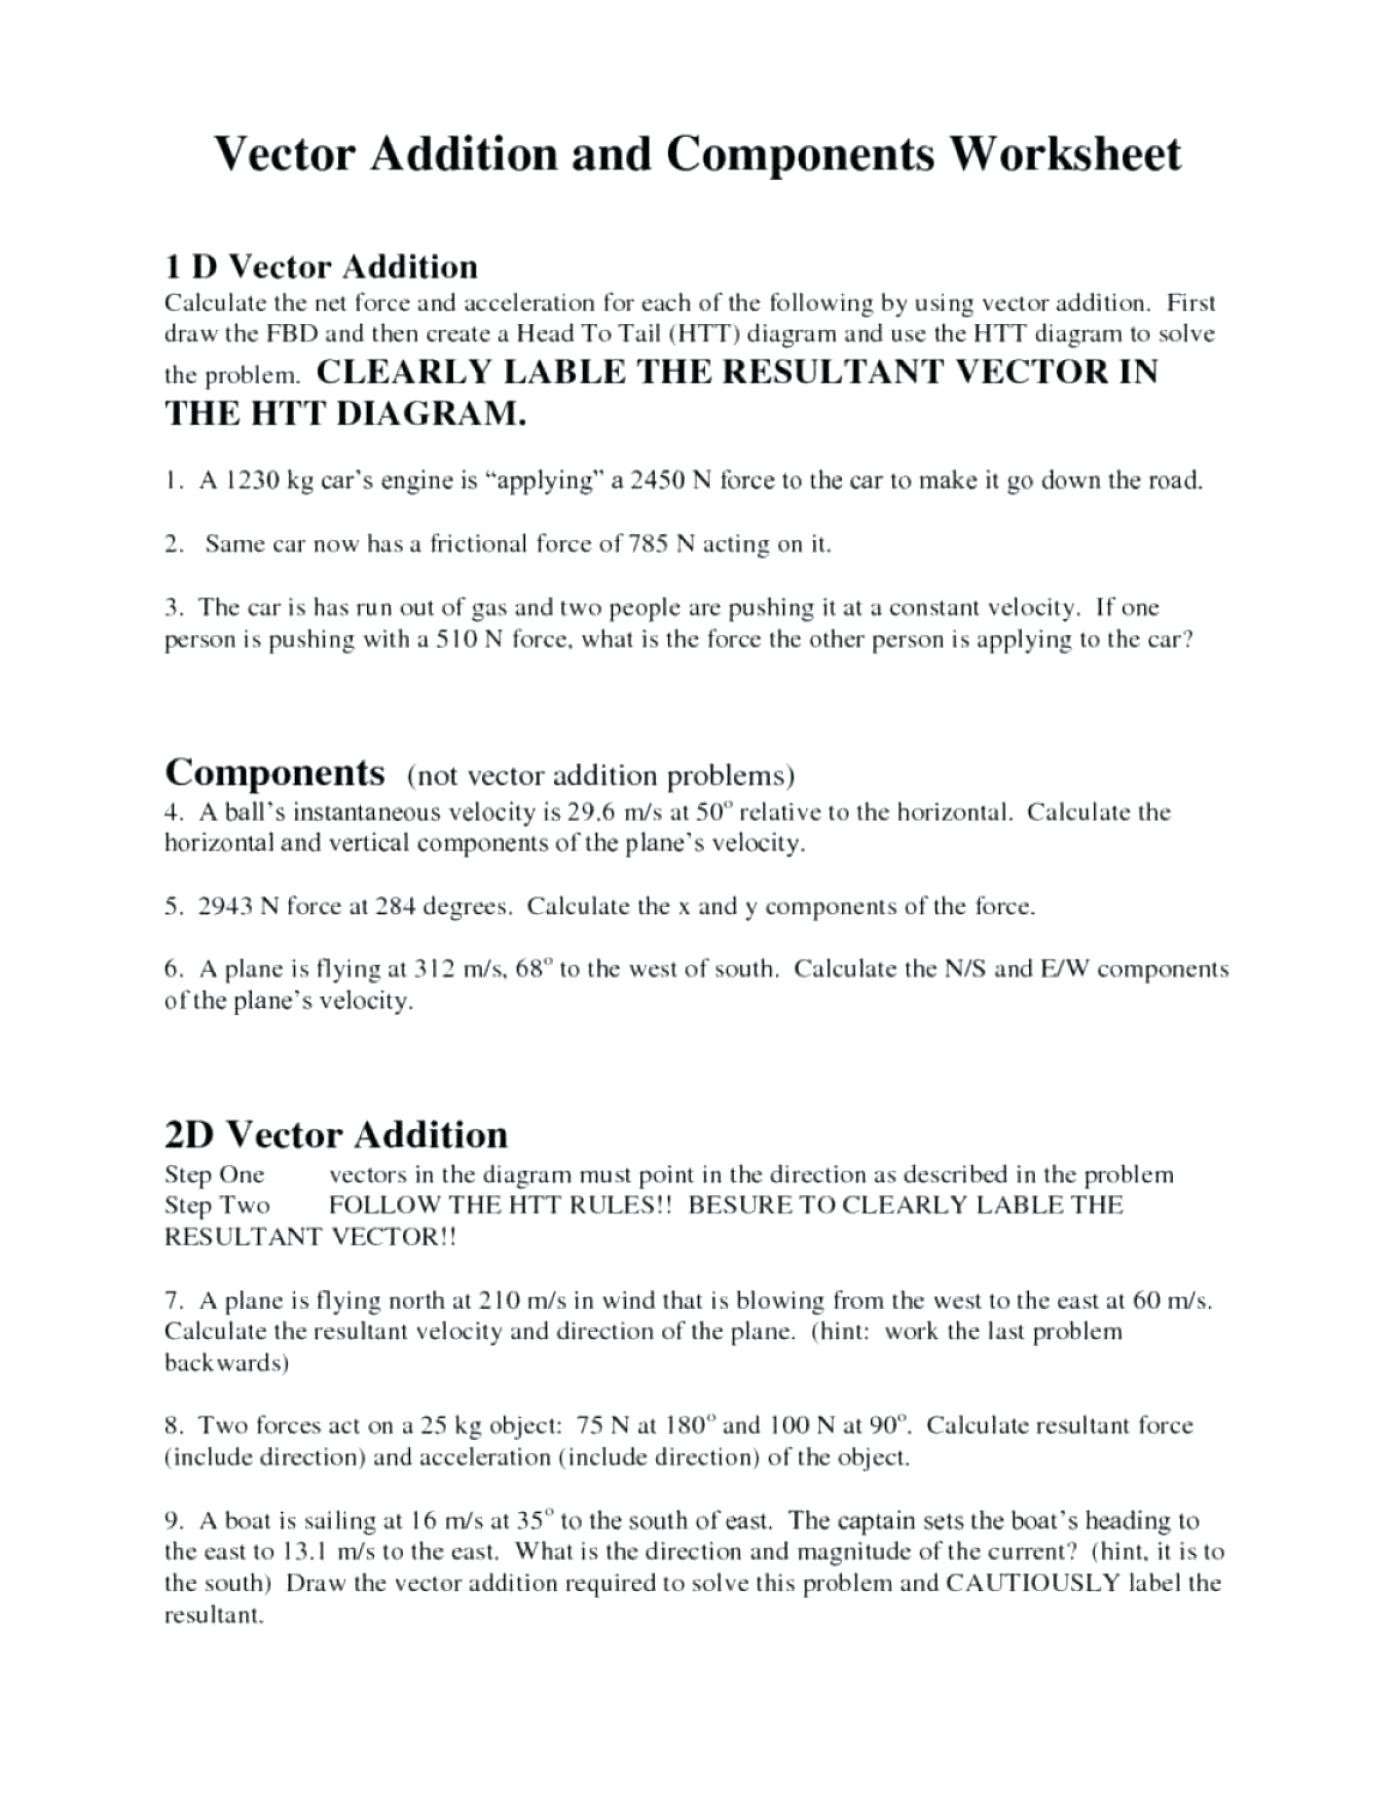 Vectors Worksheet with Answers Vector Addition Worksheet with Answers Worksheet List